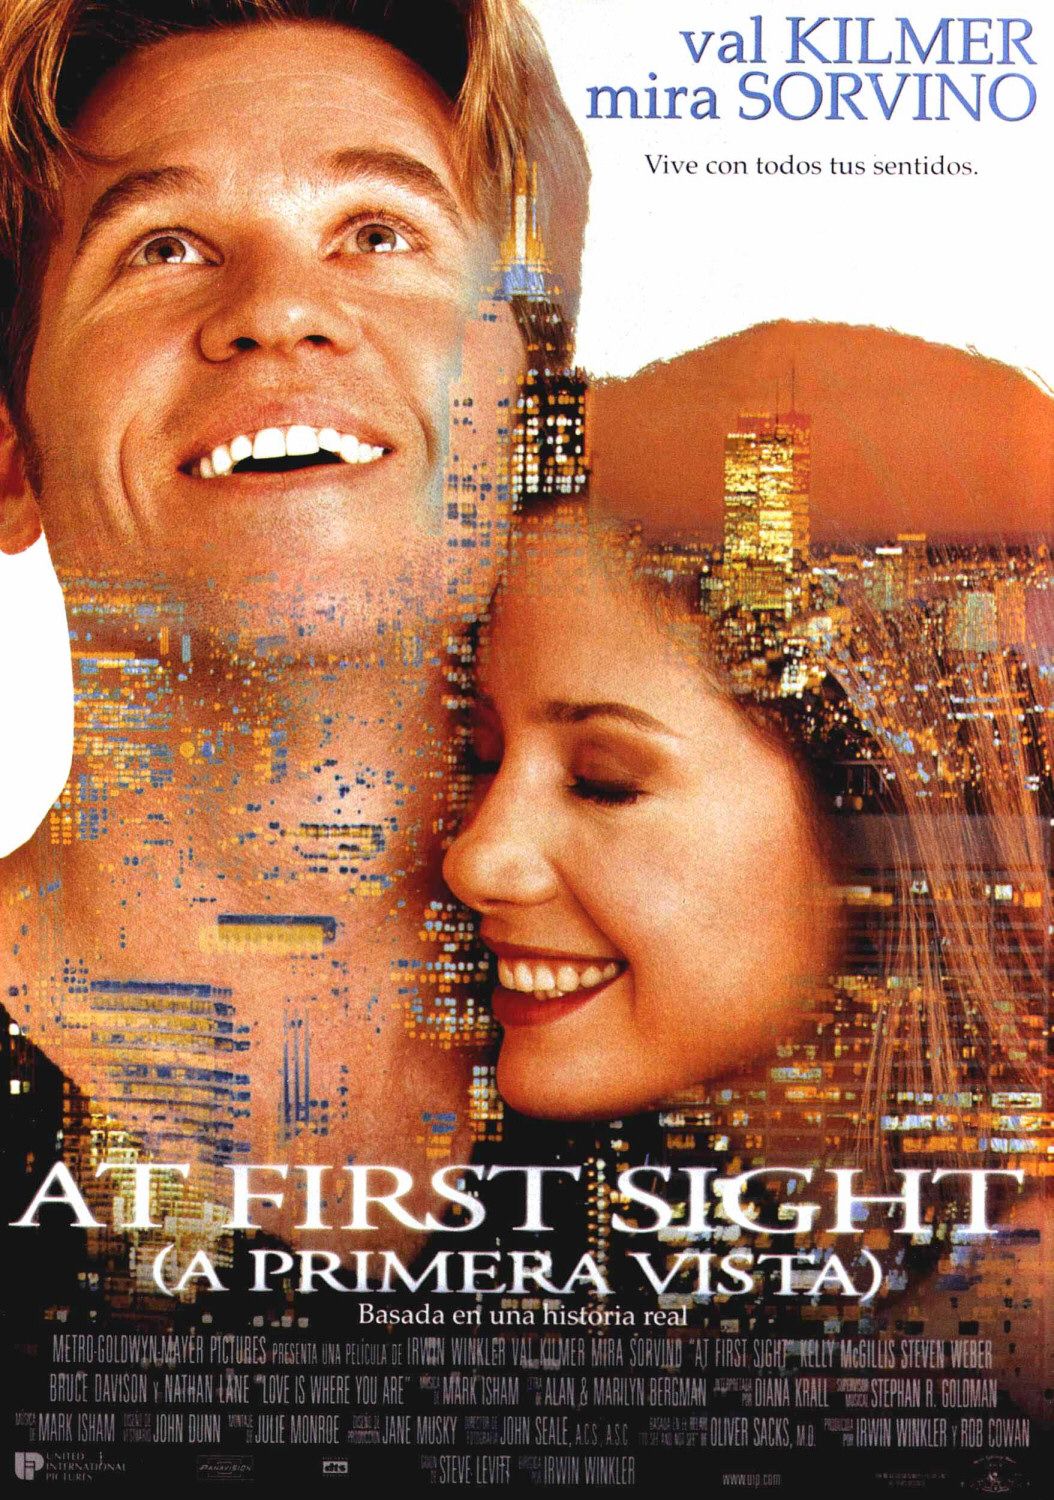 Extra Large Movie Poster Image for At First Sight (#5 of 5)